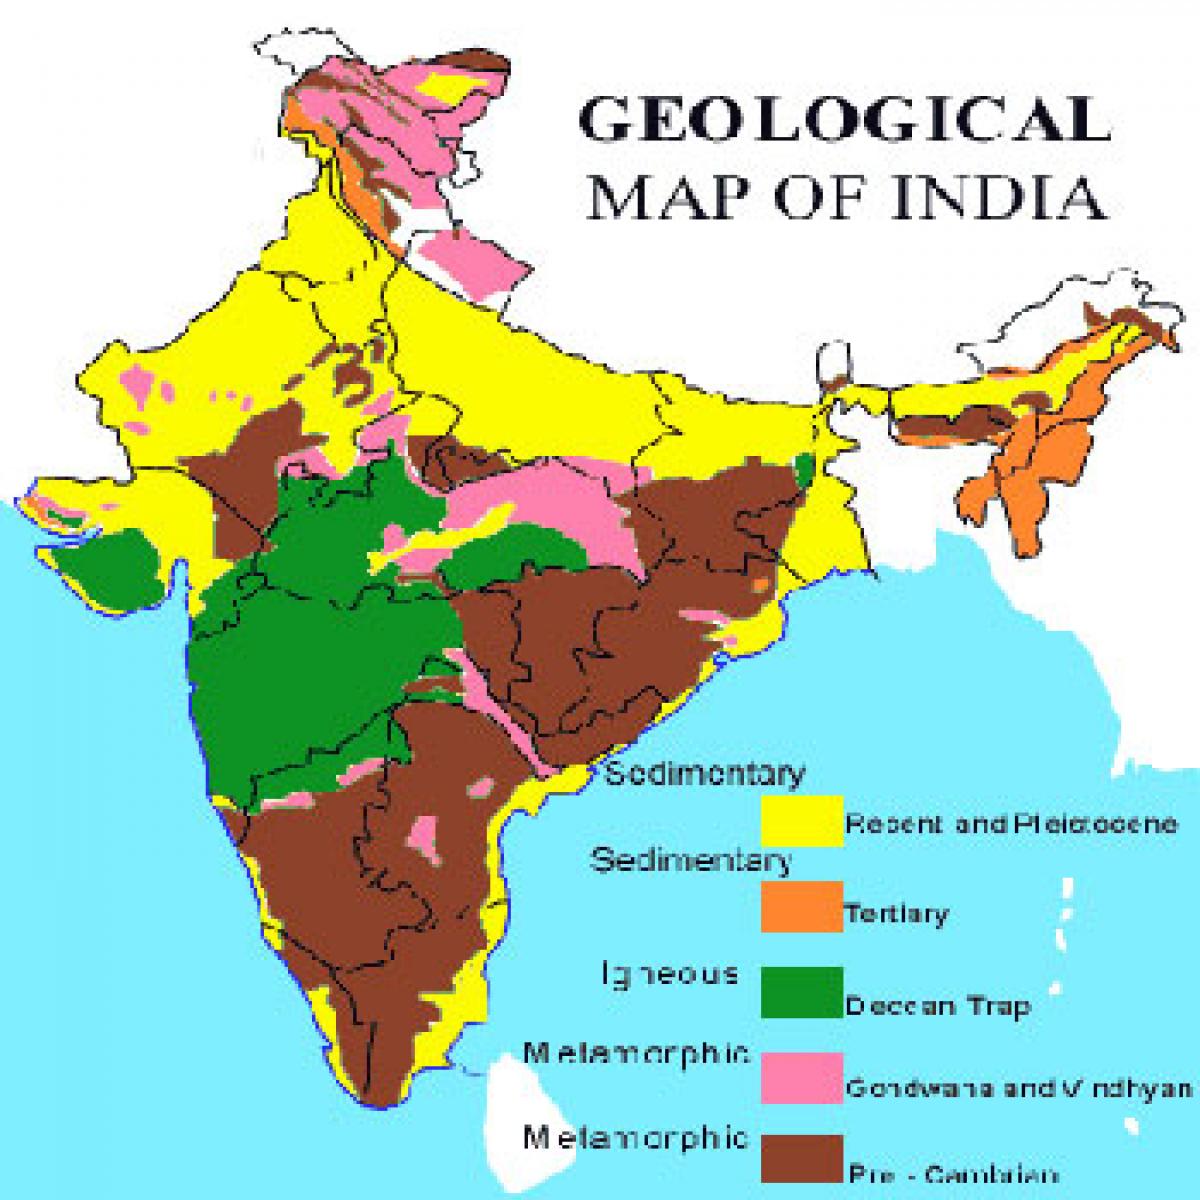 Unique Indian geological feature may mitigate climate change